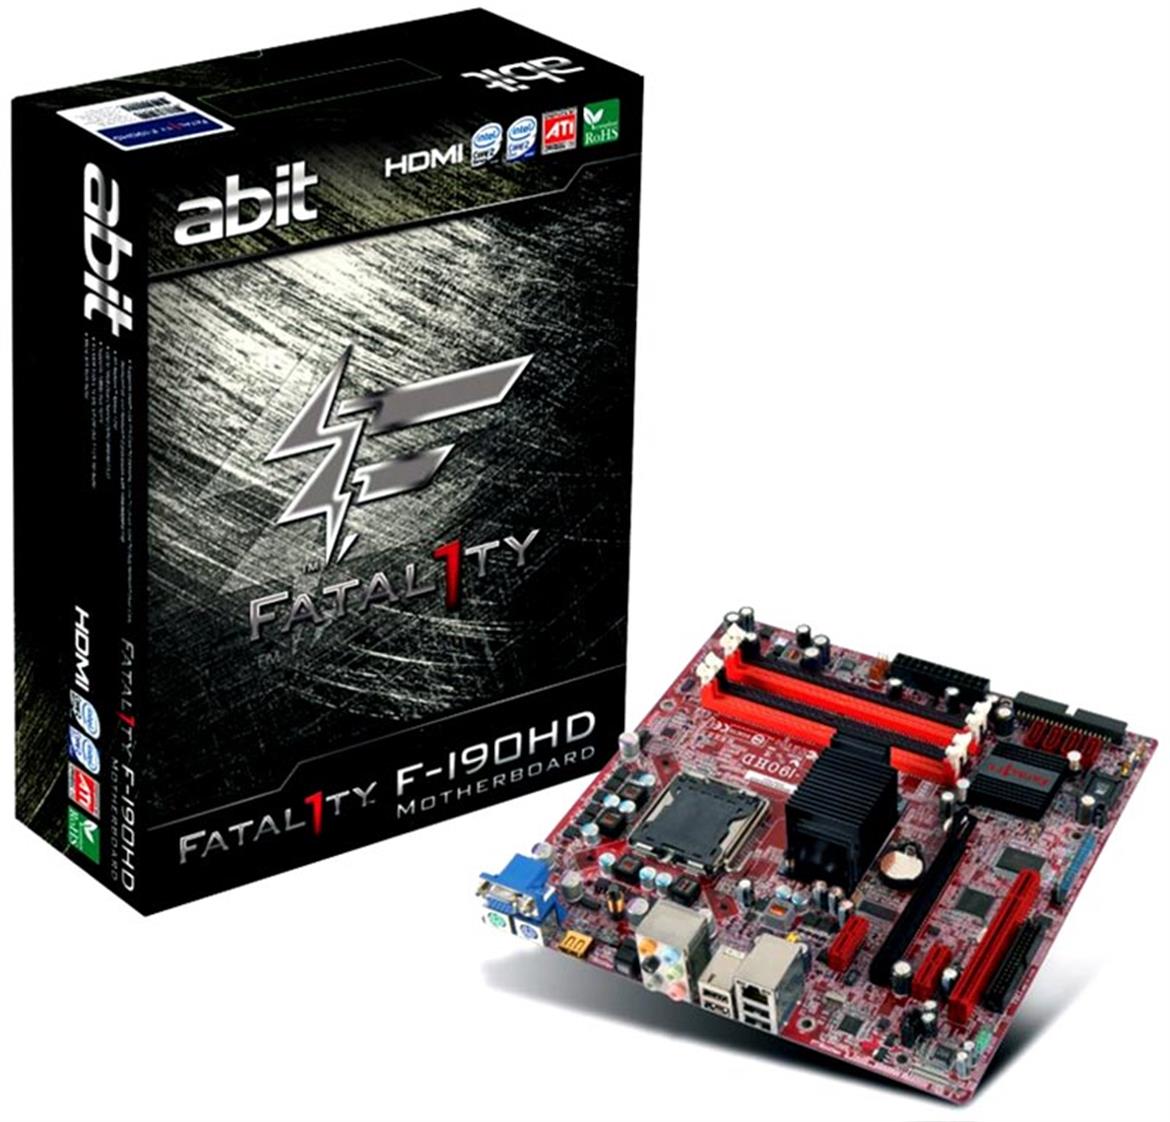 Presenting the Fatal1ty F-I90HD Motherboard